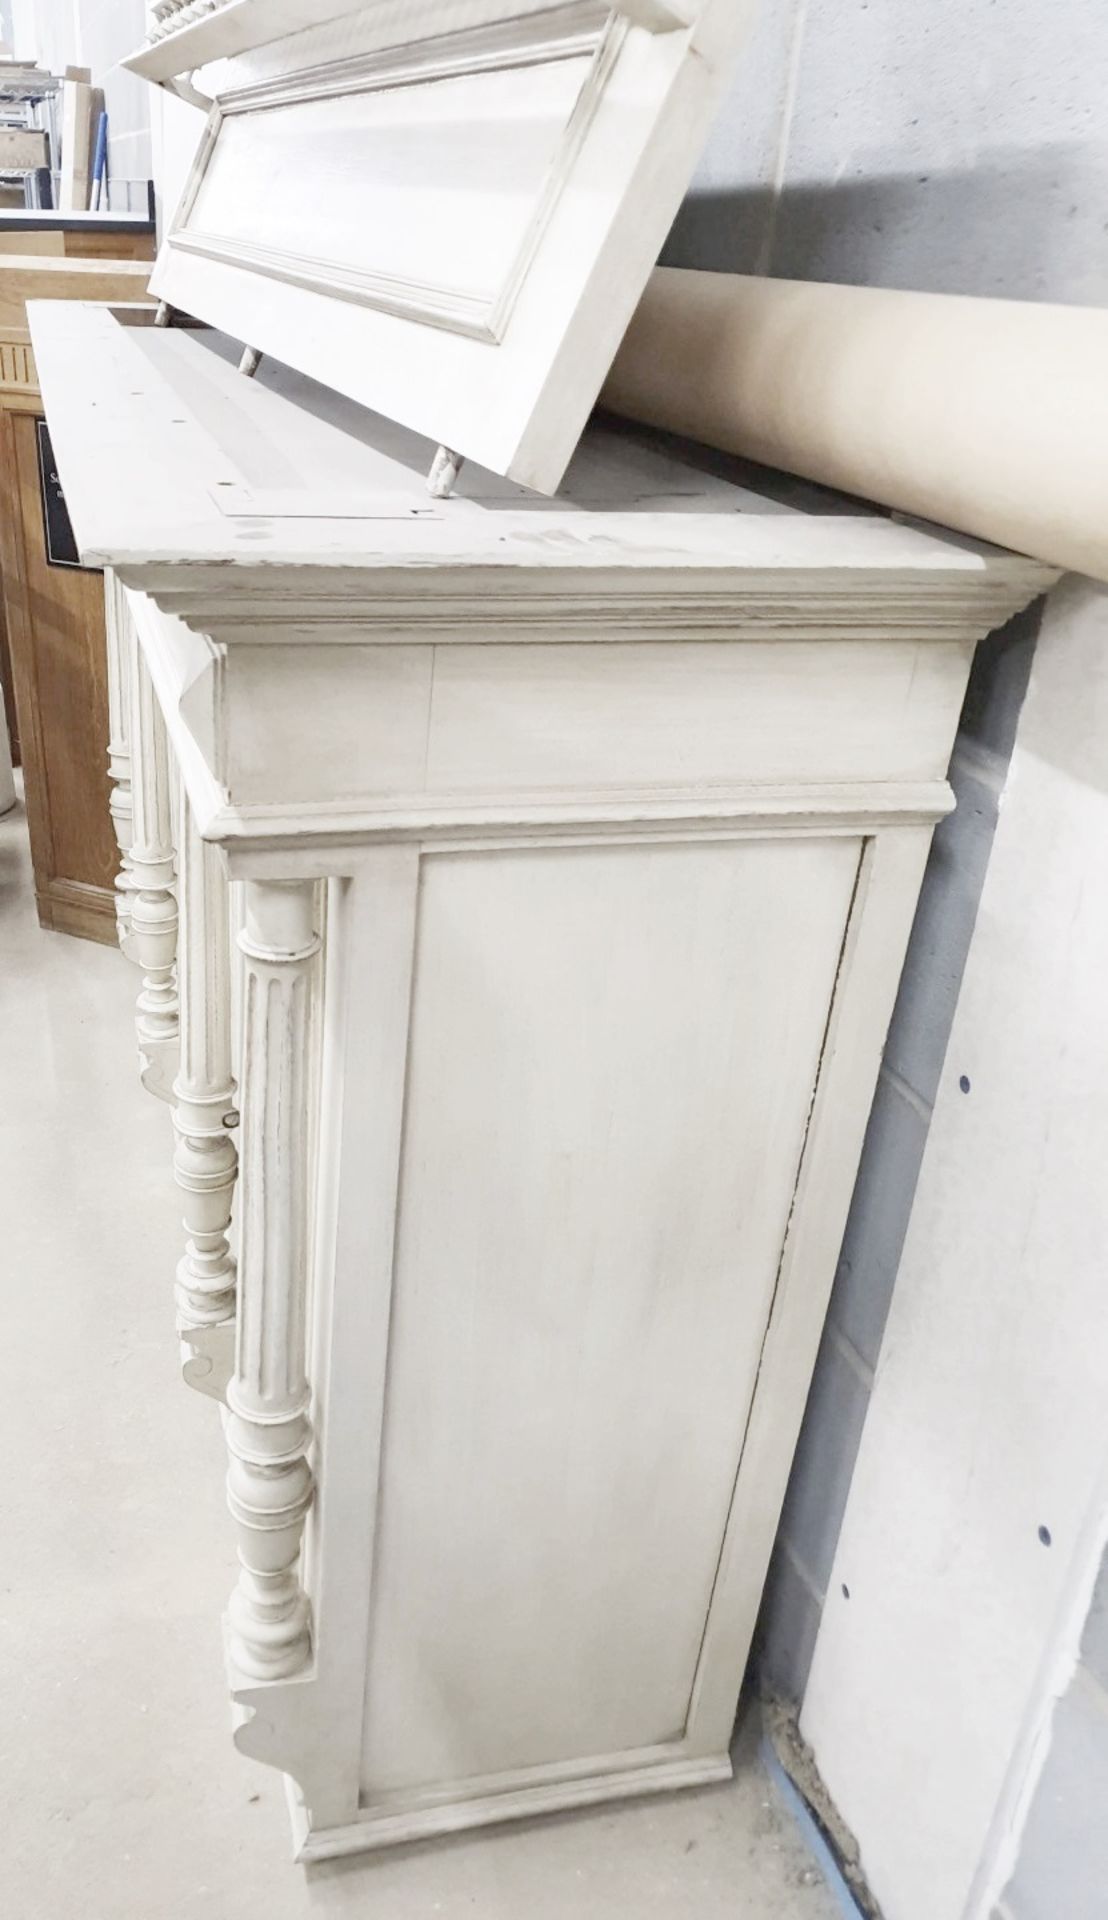 1 x Shabby Chic Dresser in Distressed White - H102/205 x W147 x D66 cms - Ref PA206 - CL463 - - Image 8 of 9